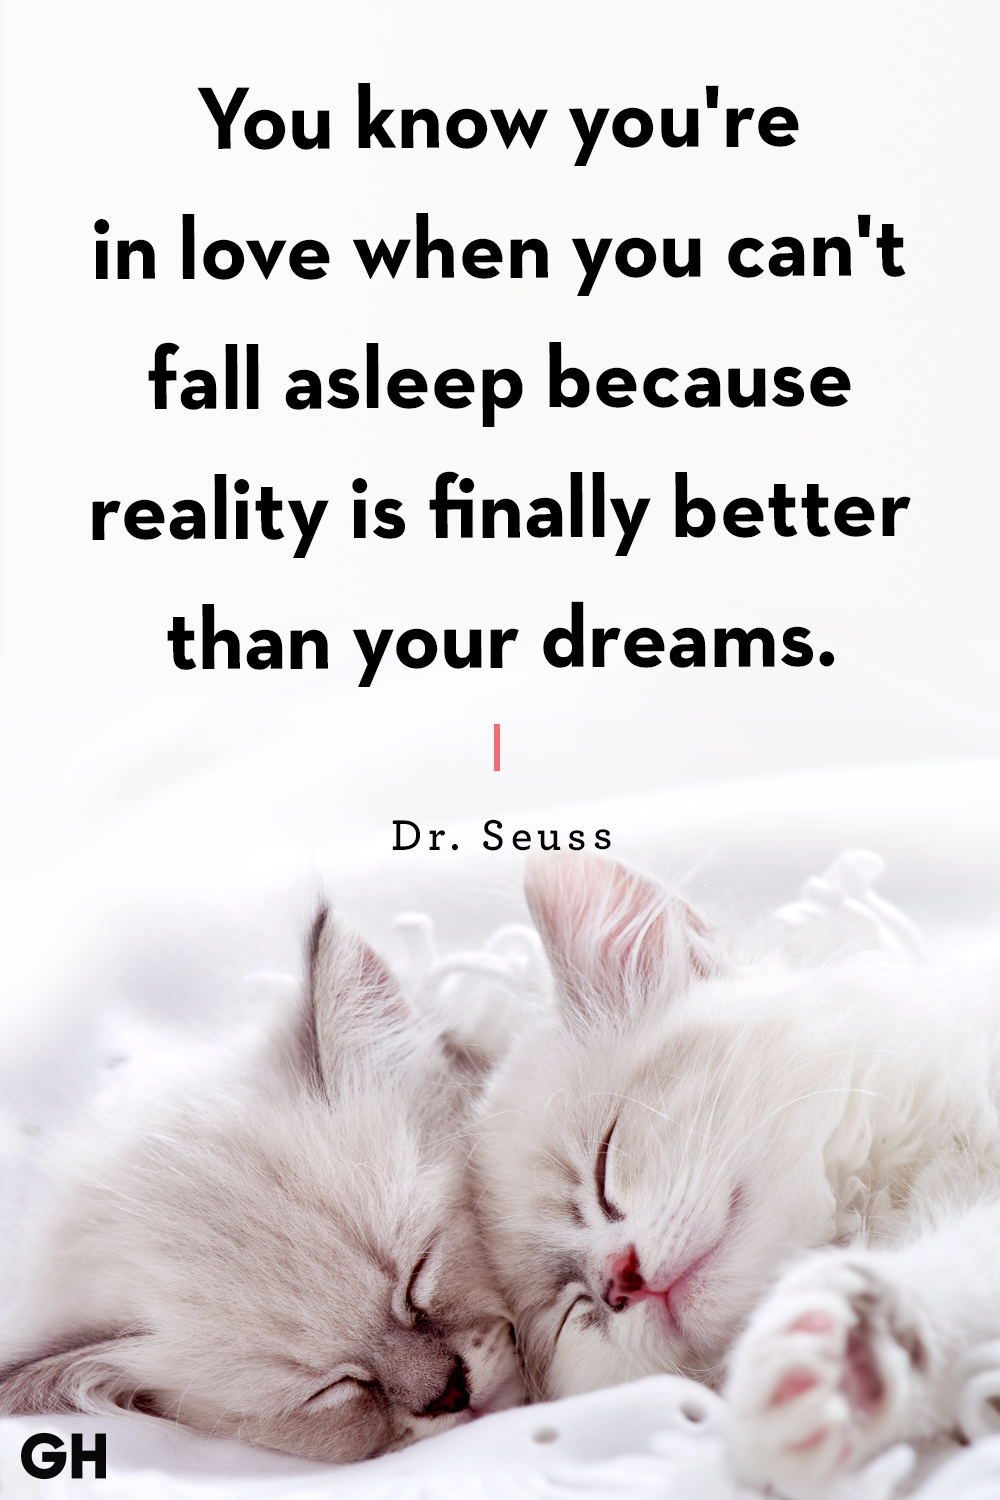 couples sleeping together quotes